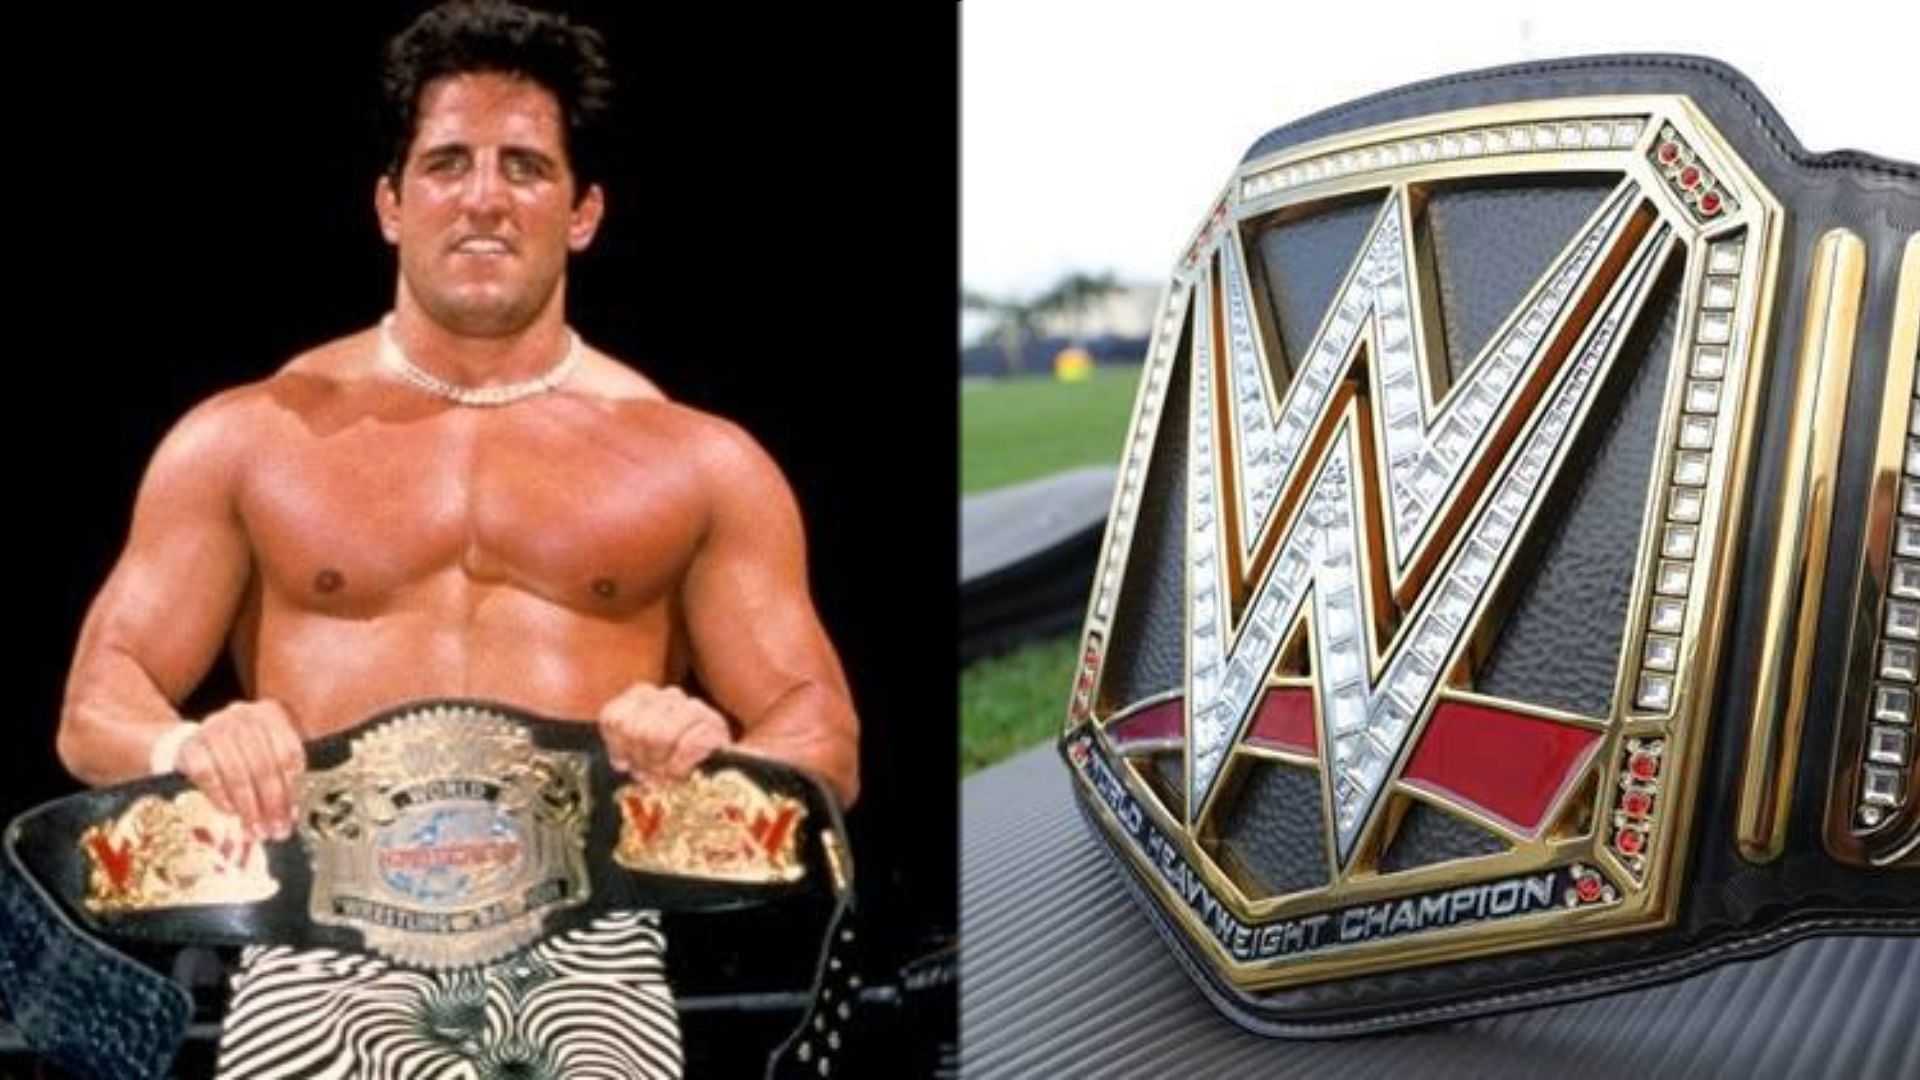 Disco Inferno is a former WCW Cruiserweight Champion.